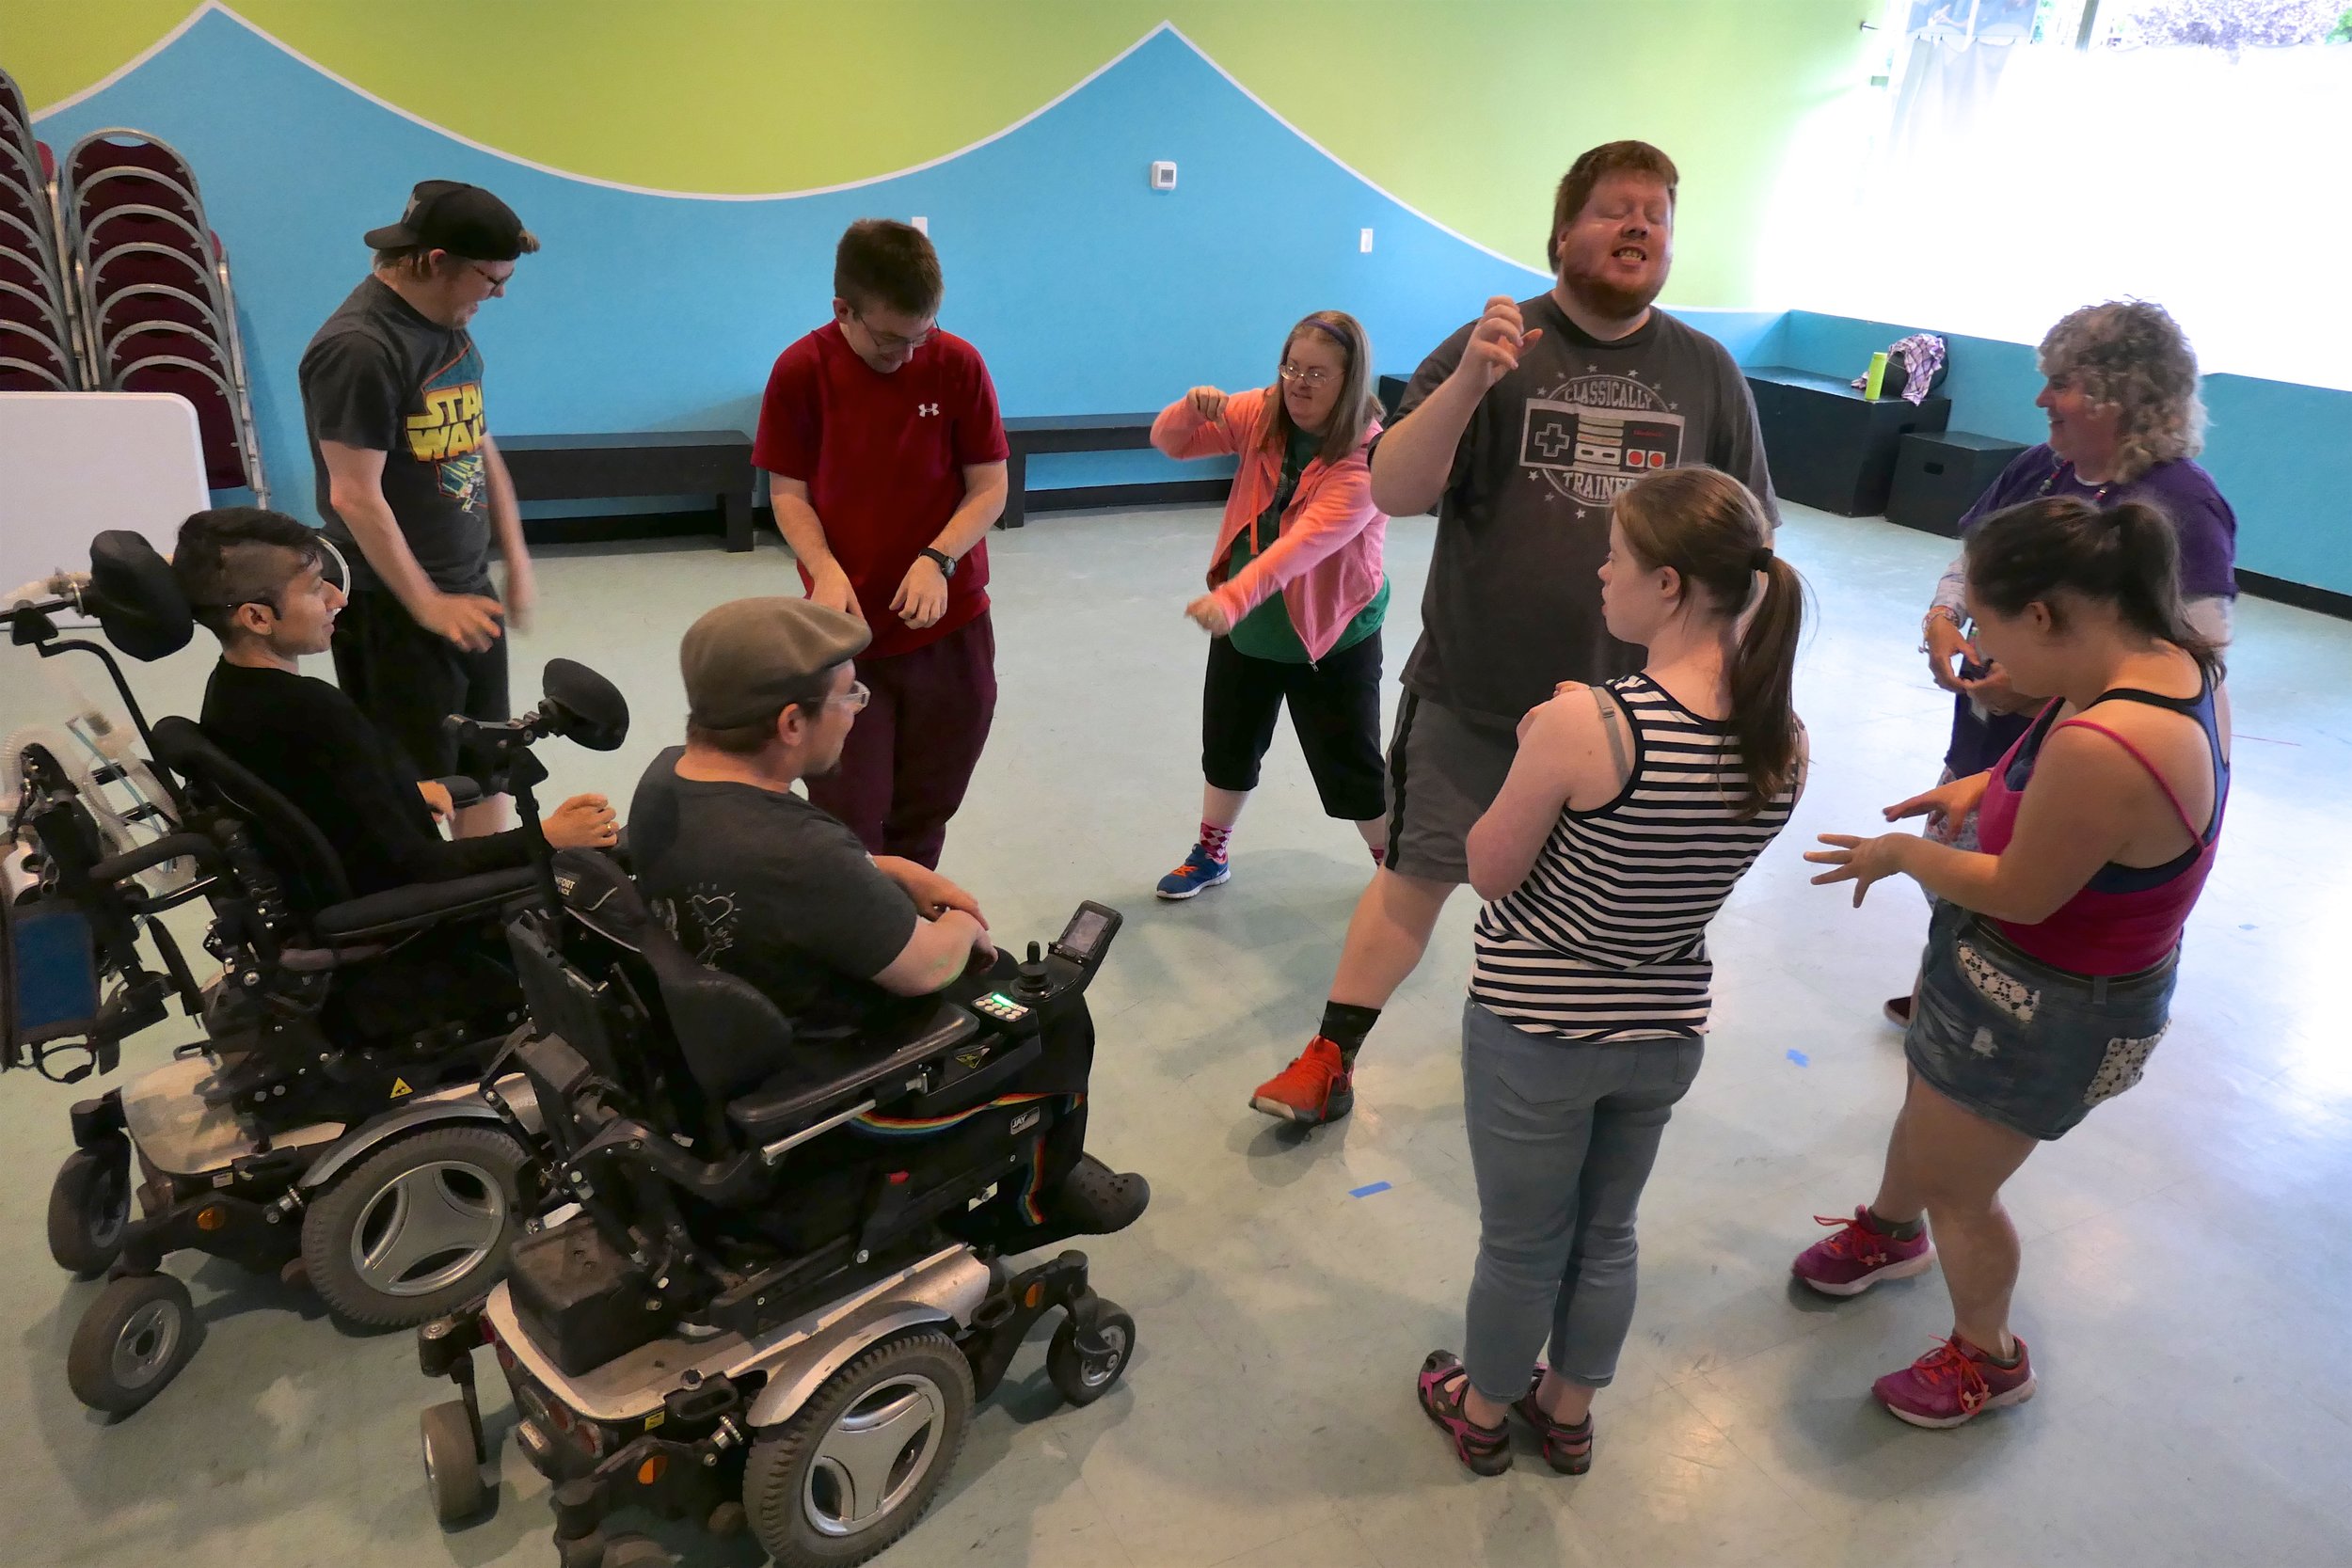 Group of people in a room, some use wheelchairs